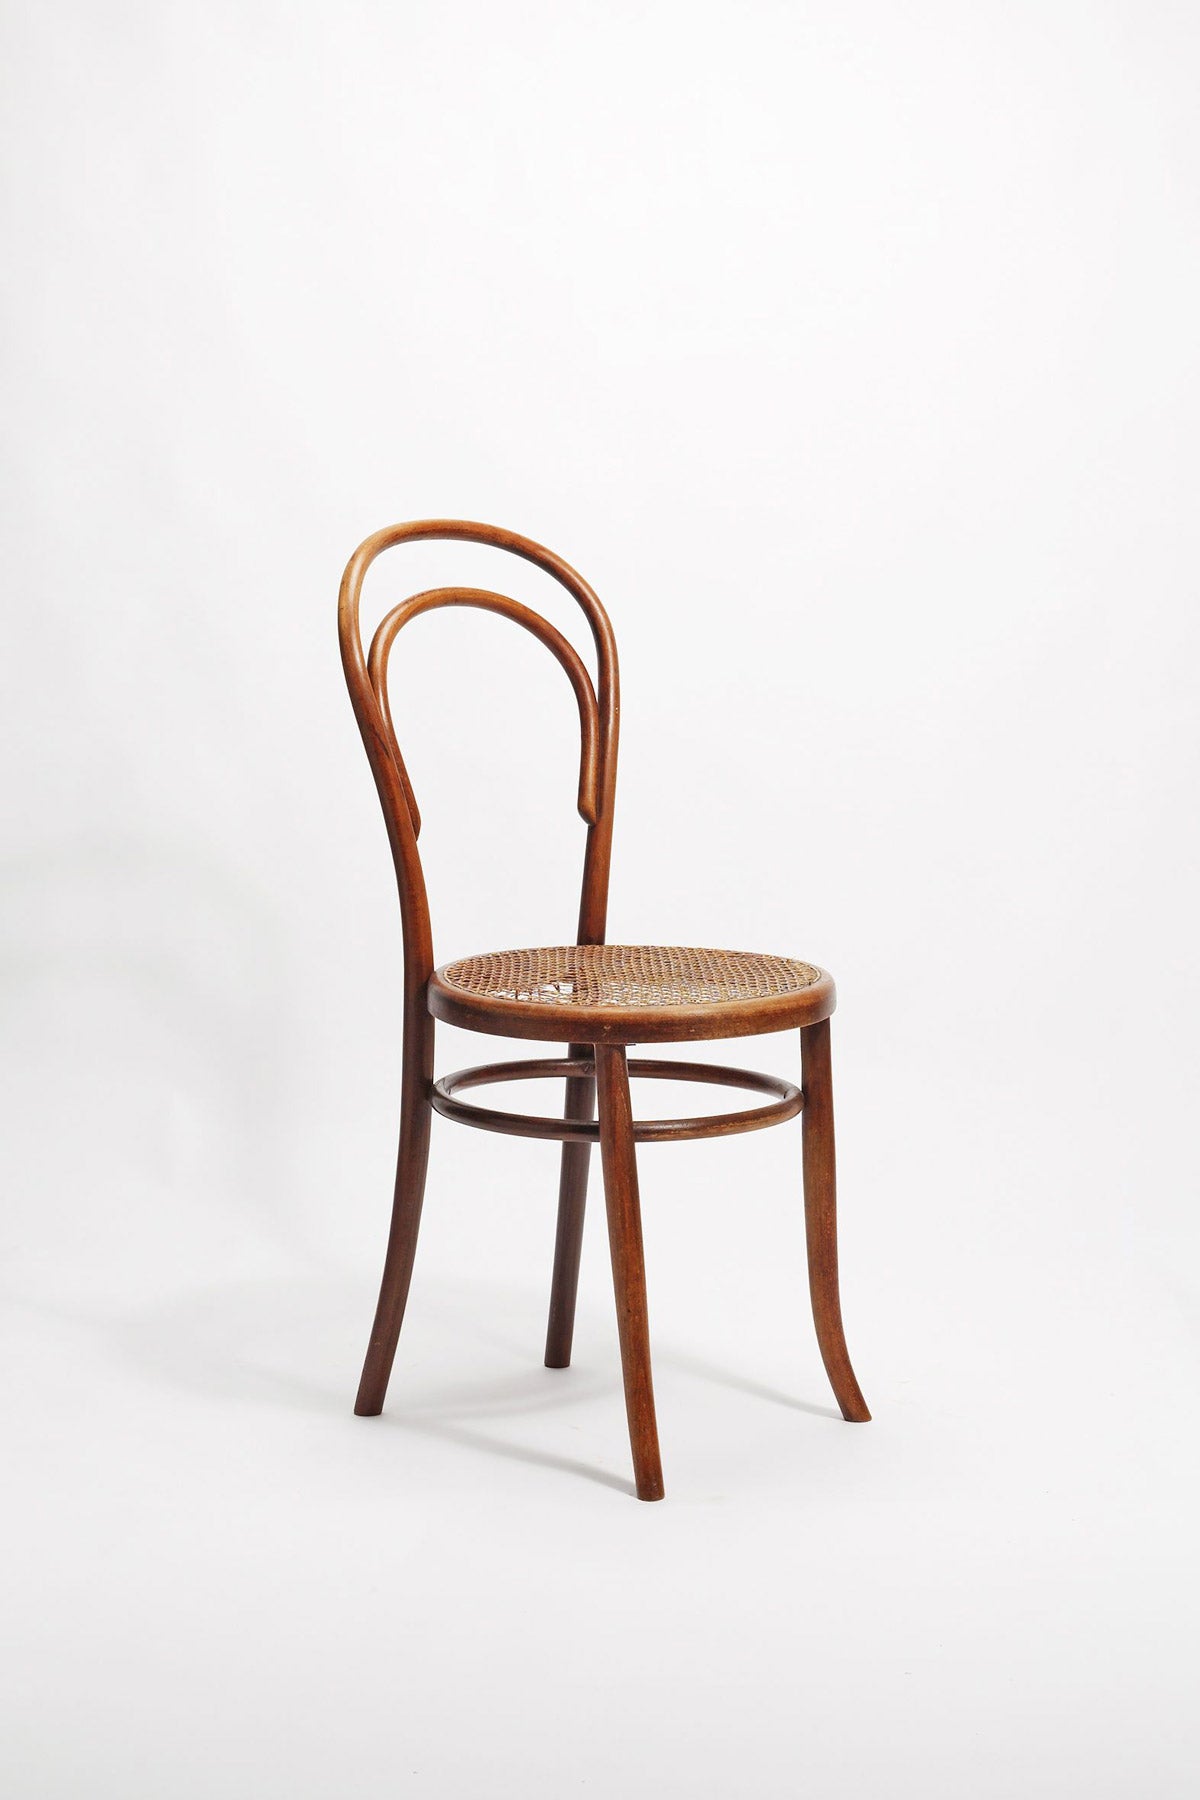 Chair No. 14